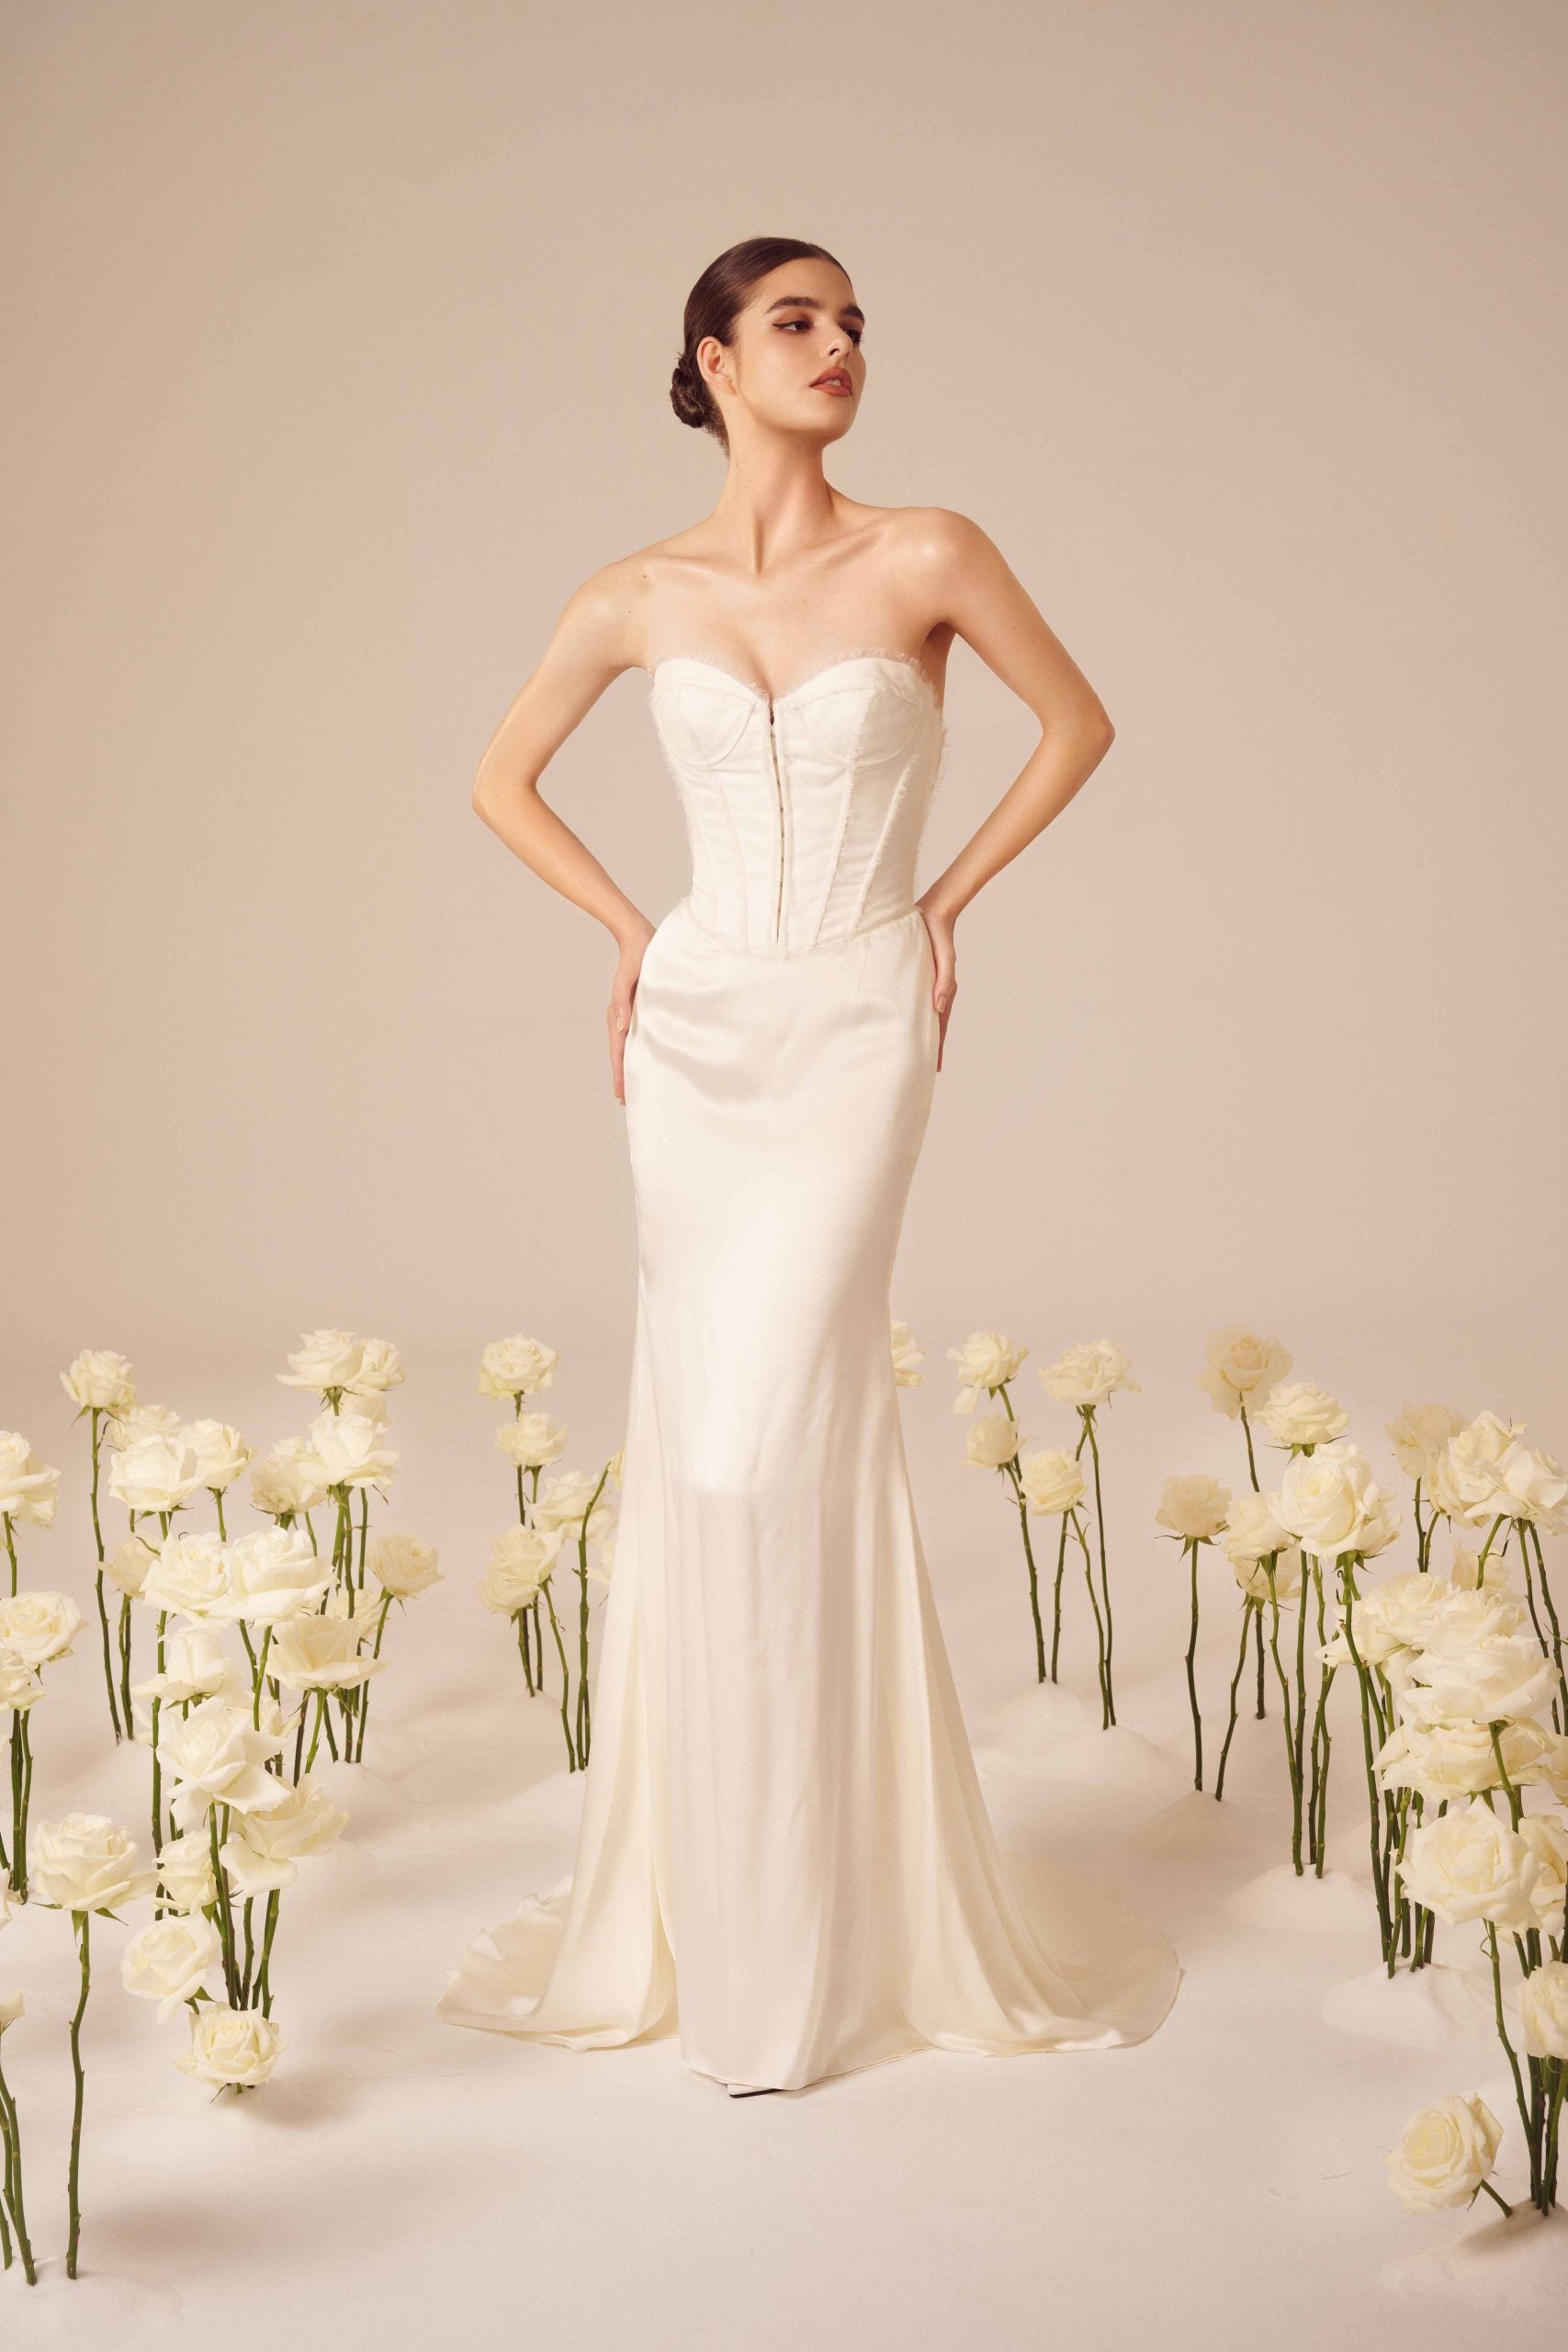 Chic And Simple Corset Sheath Gown by Nicole + Felicia - Image 1